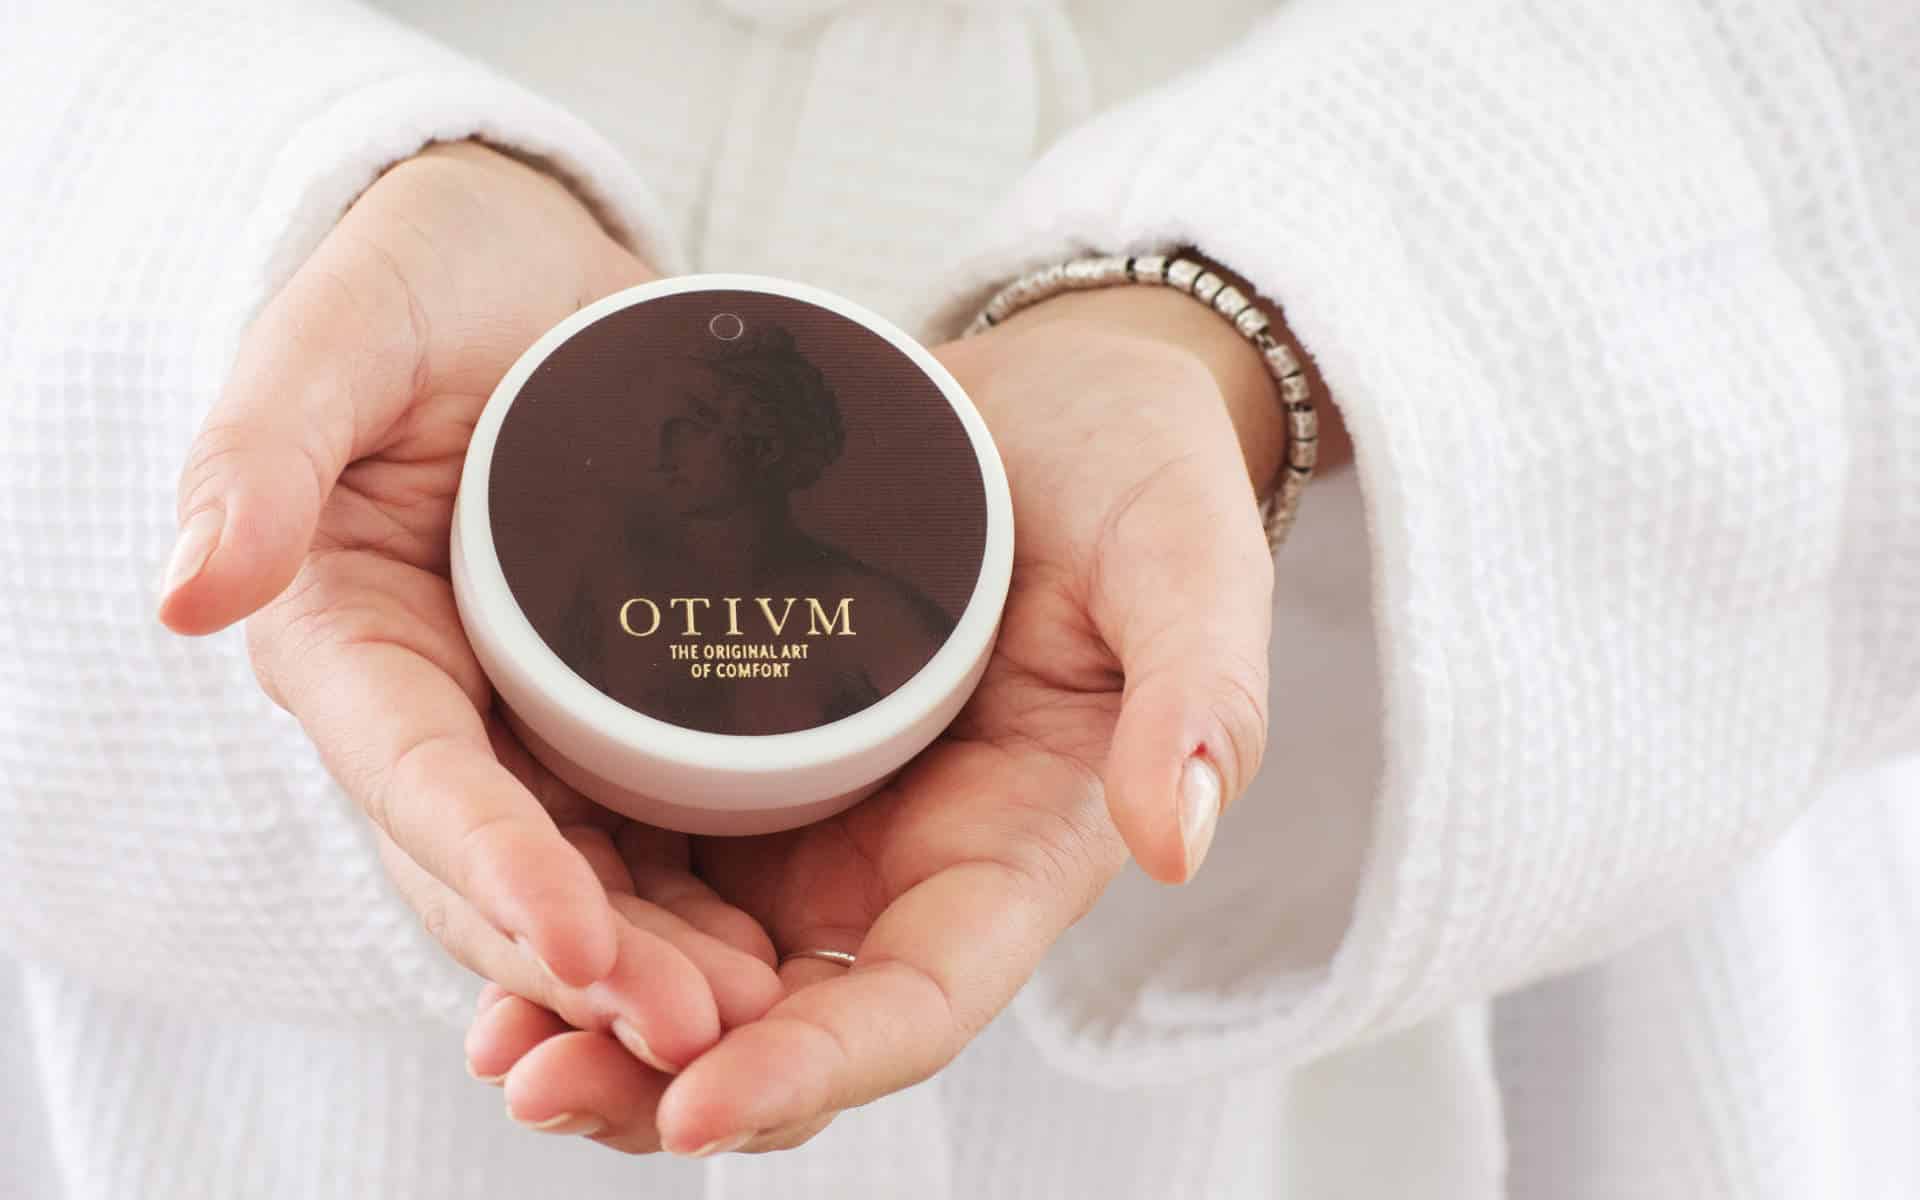 The Otium wellness program will debut on Silver Dawn in 2022.